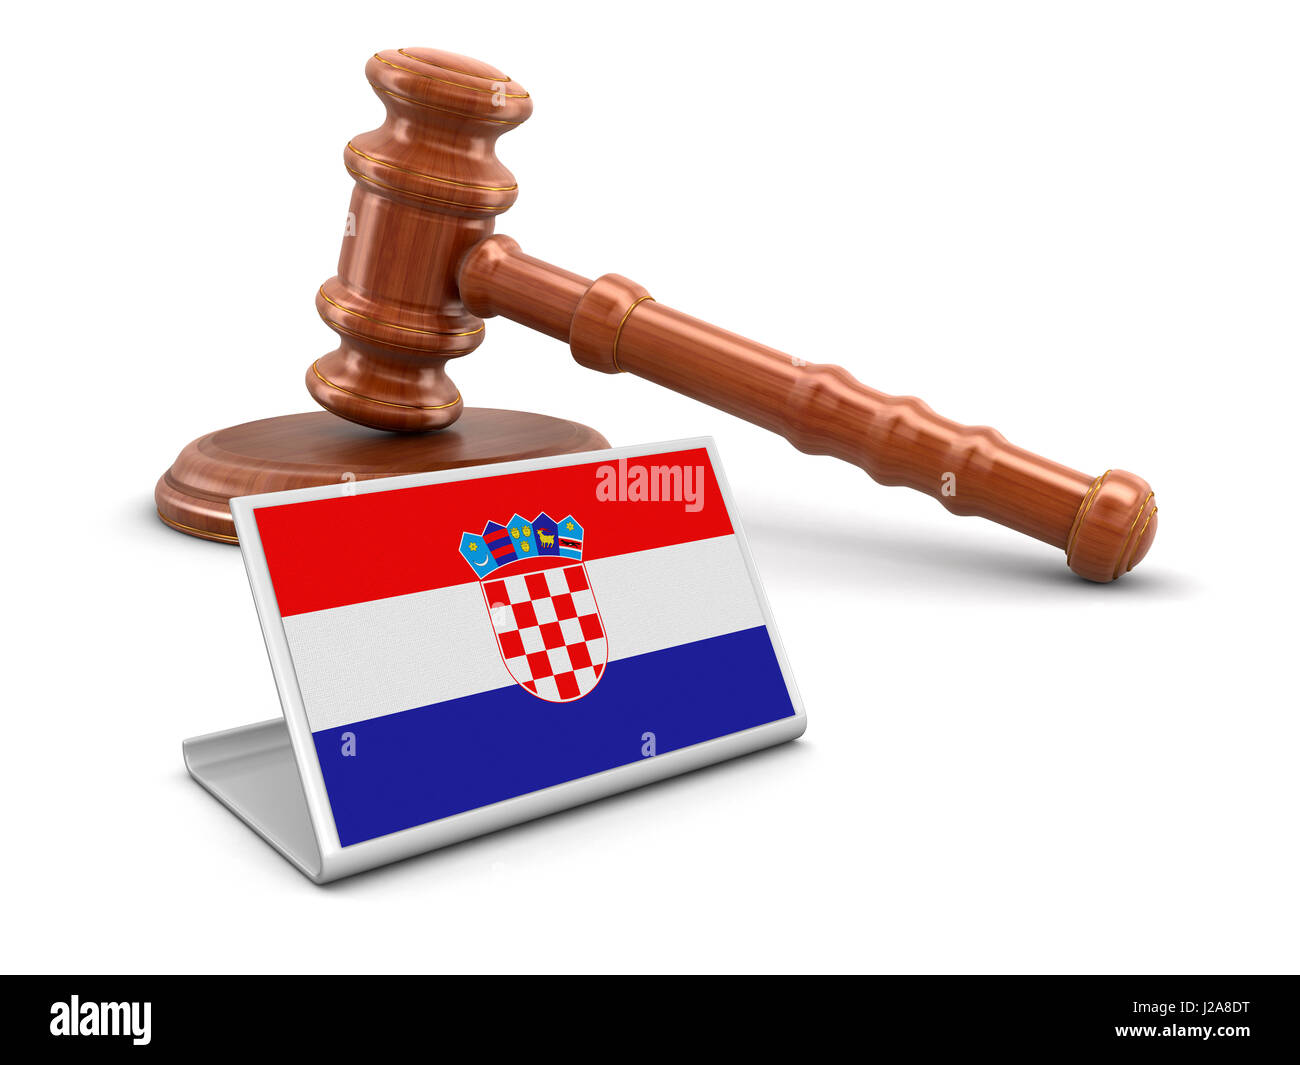 3d wooden mallet and Croatian flag. Image with clipping path Stock Photo